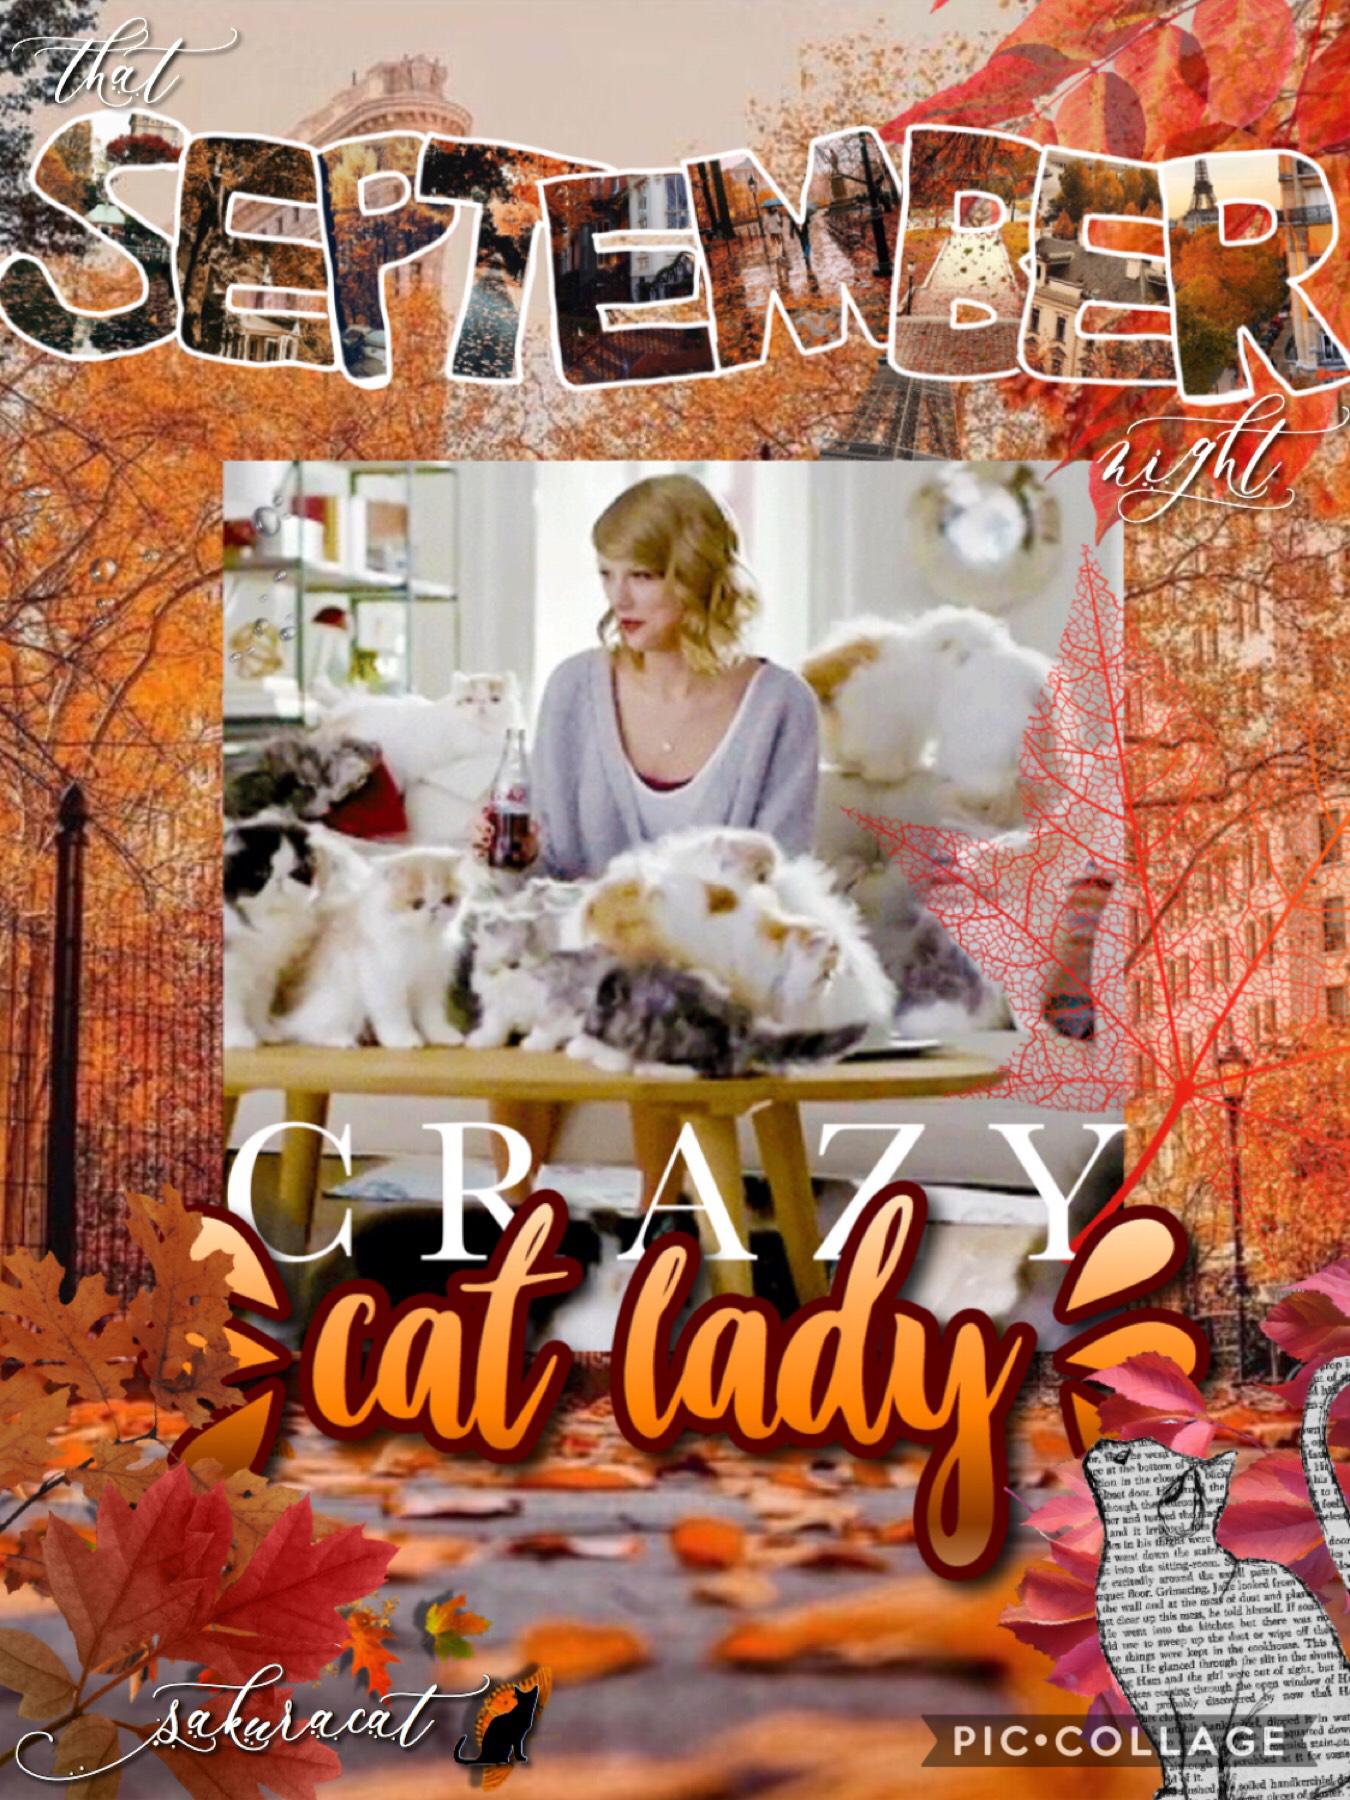 Tap😂

Another Autumn/Taylor collage! Autumn is my fav theme and Taylor collages are always so fun to make! QOTD: who do you ship in HP? AOTD: Dramione and DEMUMBRIDGE MUAHAHAHA FOLLOW MY MINIATURE BLOG ACCOUNT @TheCatBlogs #fightcancer #mirackesdohappen #